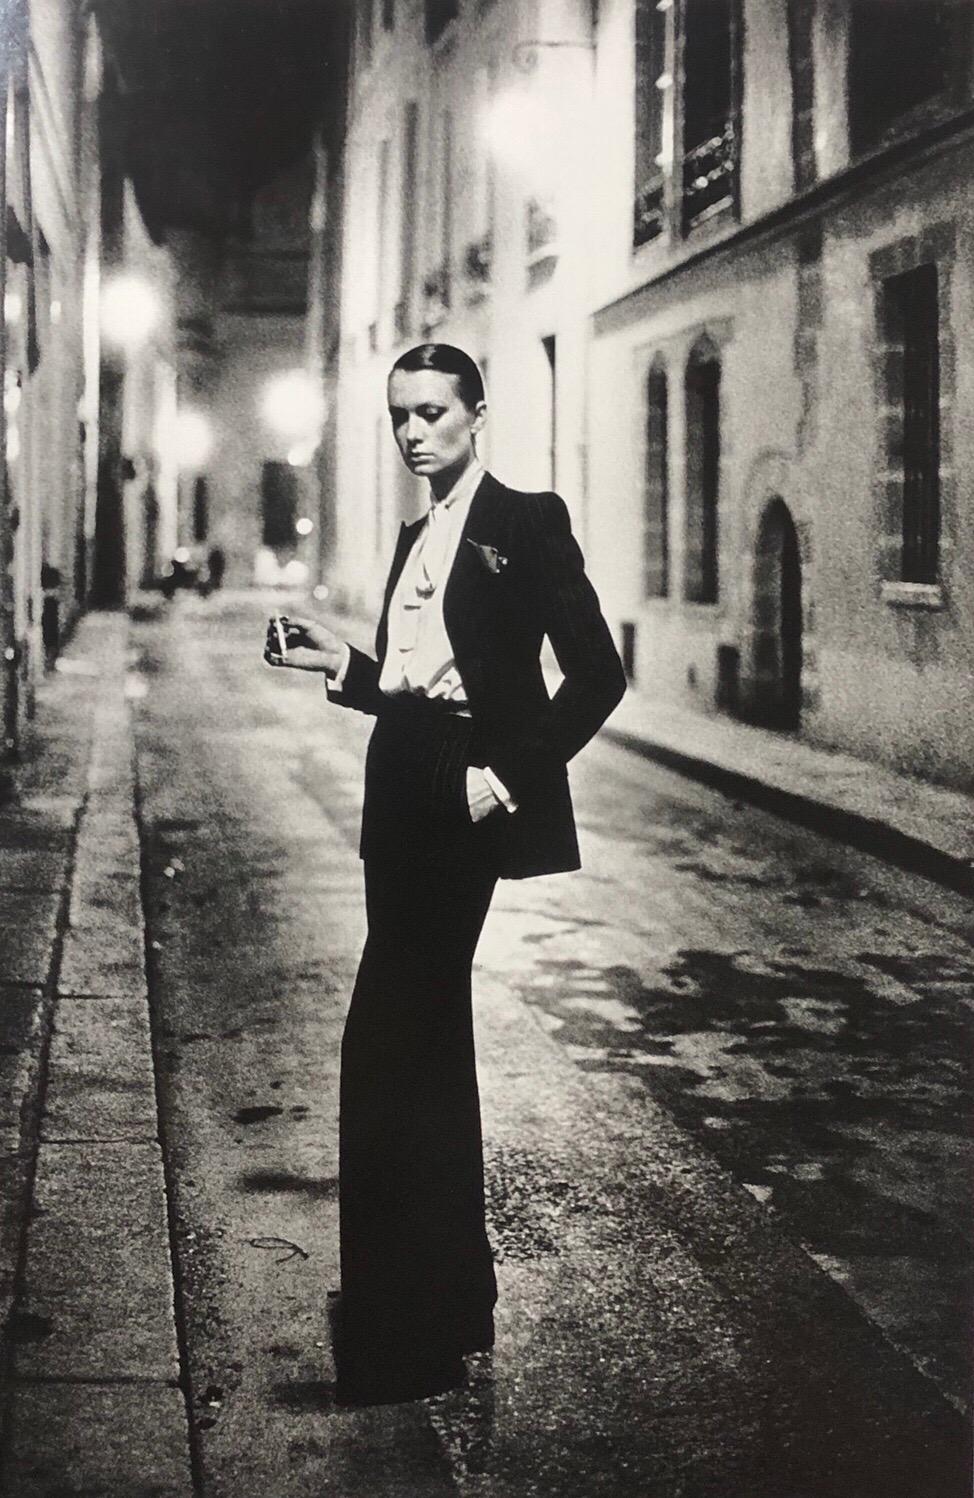 Original early 1980's silver gelatin print title "Rue Aubriot" featuring actress Vibeke Knudsen alone in a lamp lit Parisian street. The image has become one of Helmut Newton's most popular and widely collected.  Styled in a deliberately androgynous